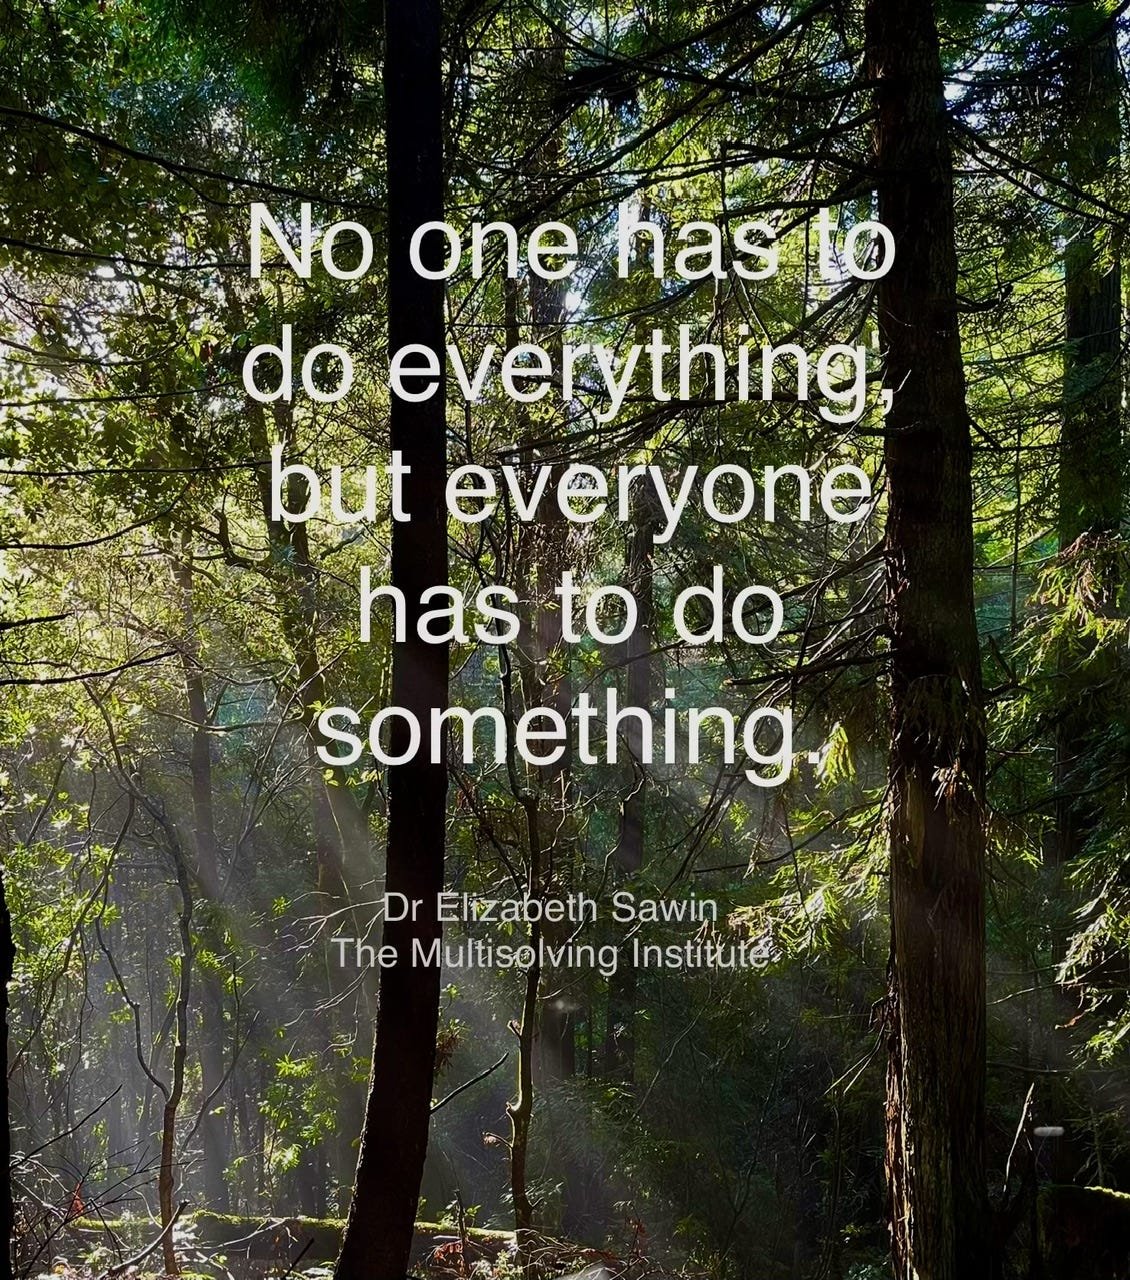 redwood forest with quote from Elizabeth Sawin